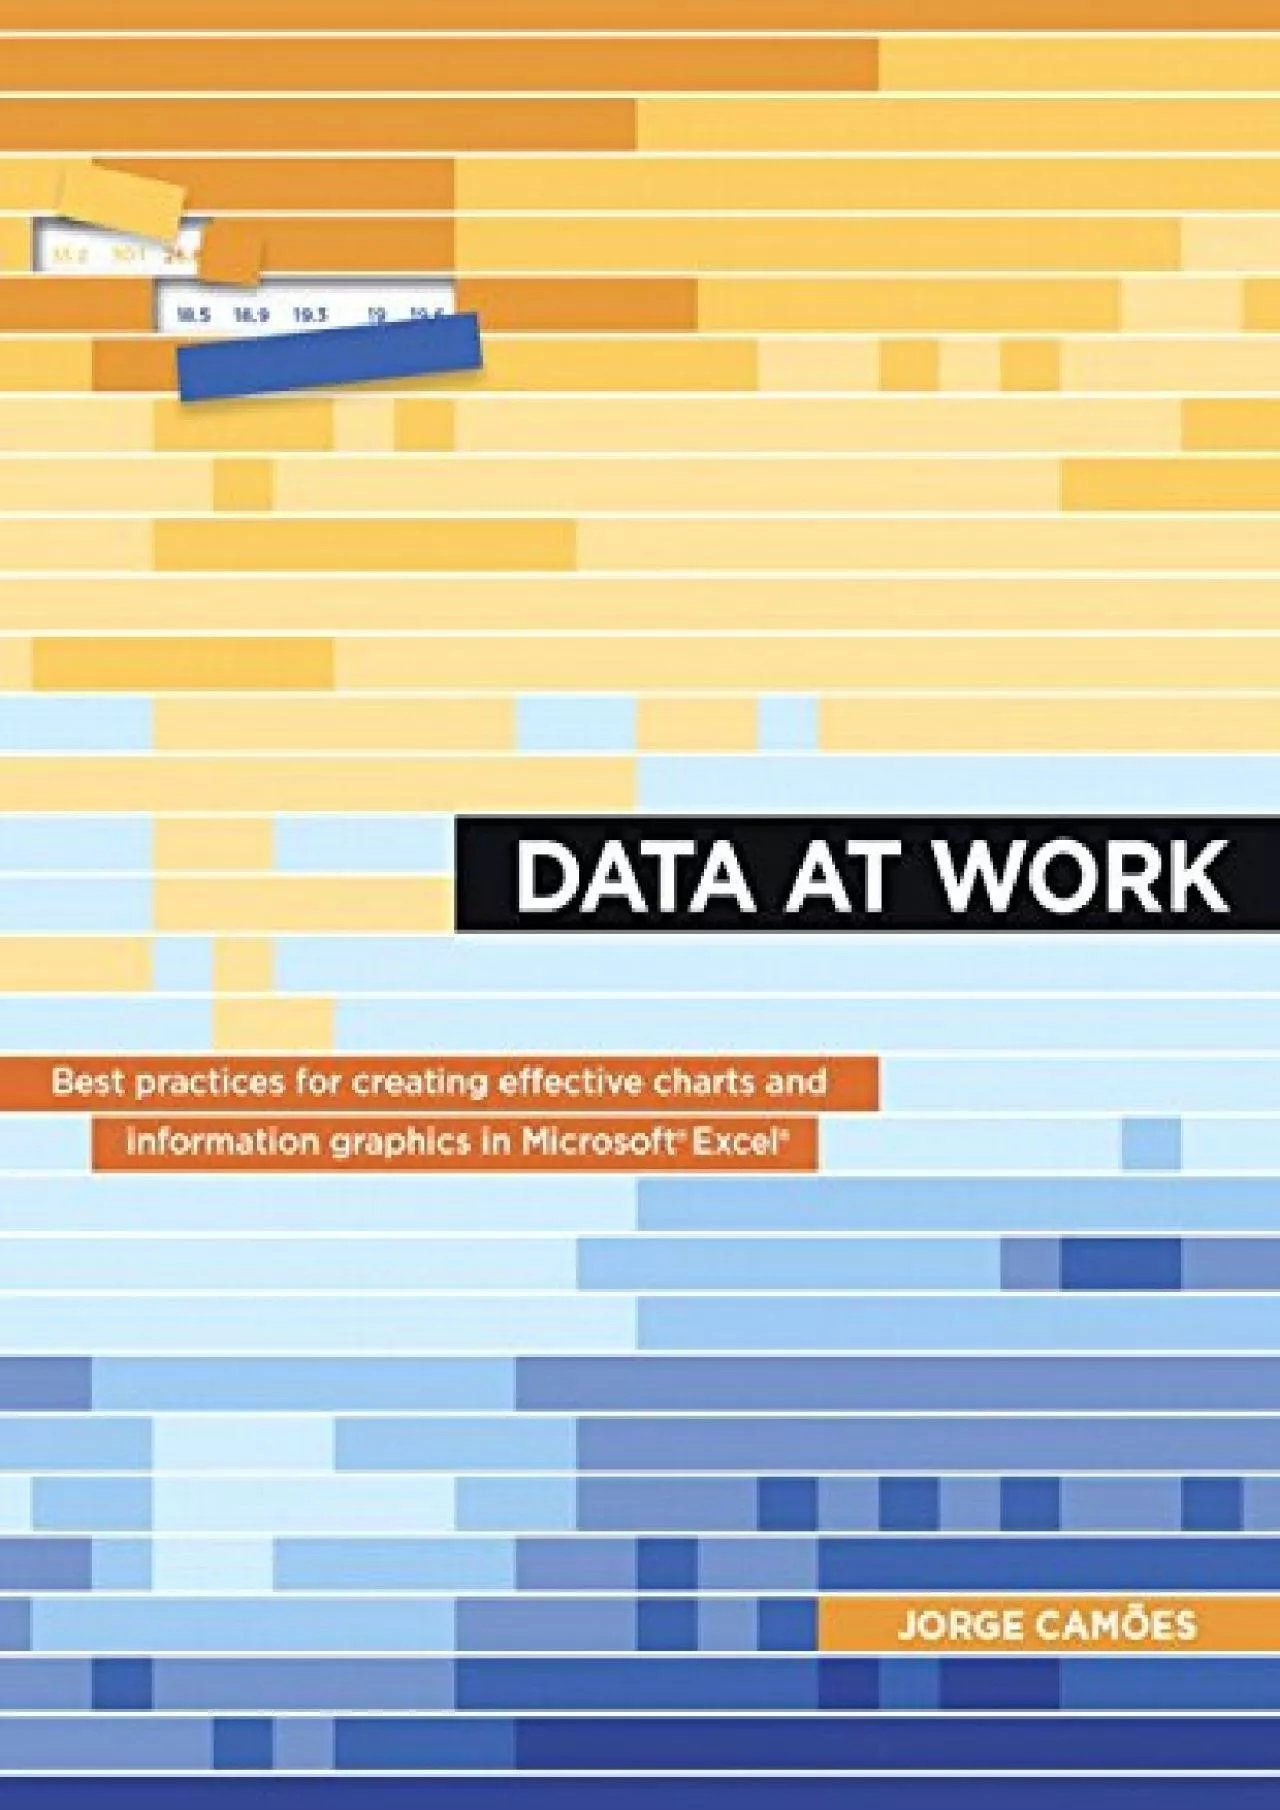 Data at Work: Best practices for creating effective charts and information graphics in